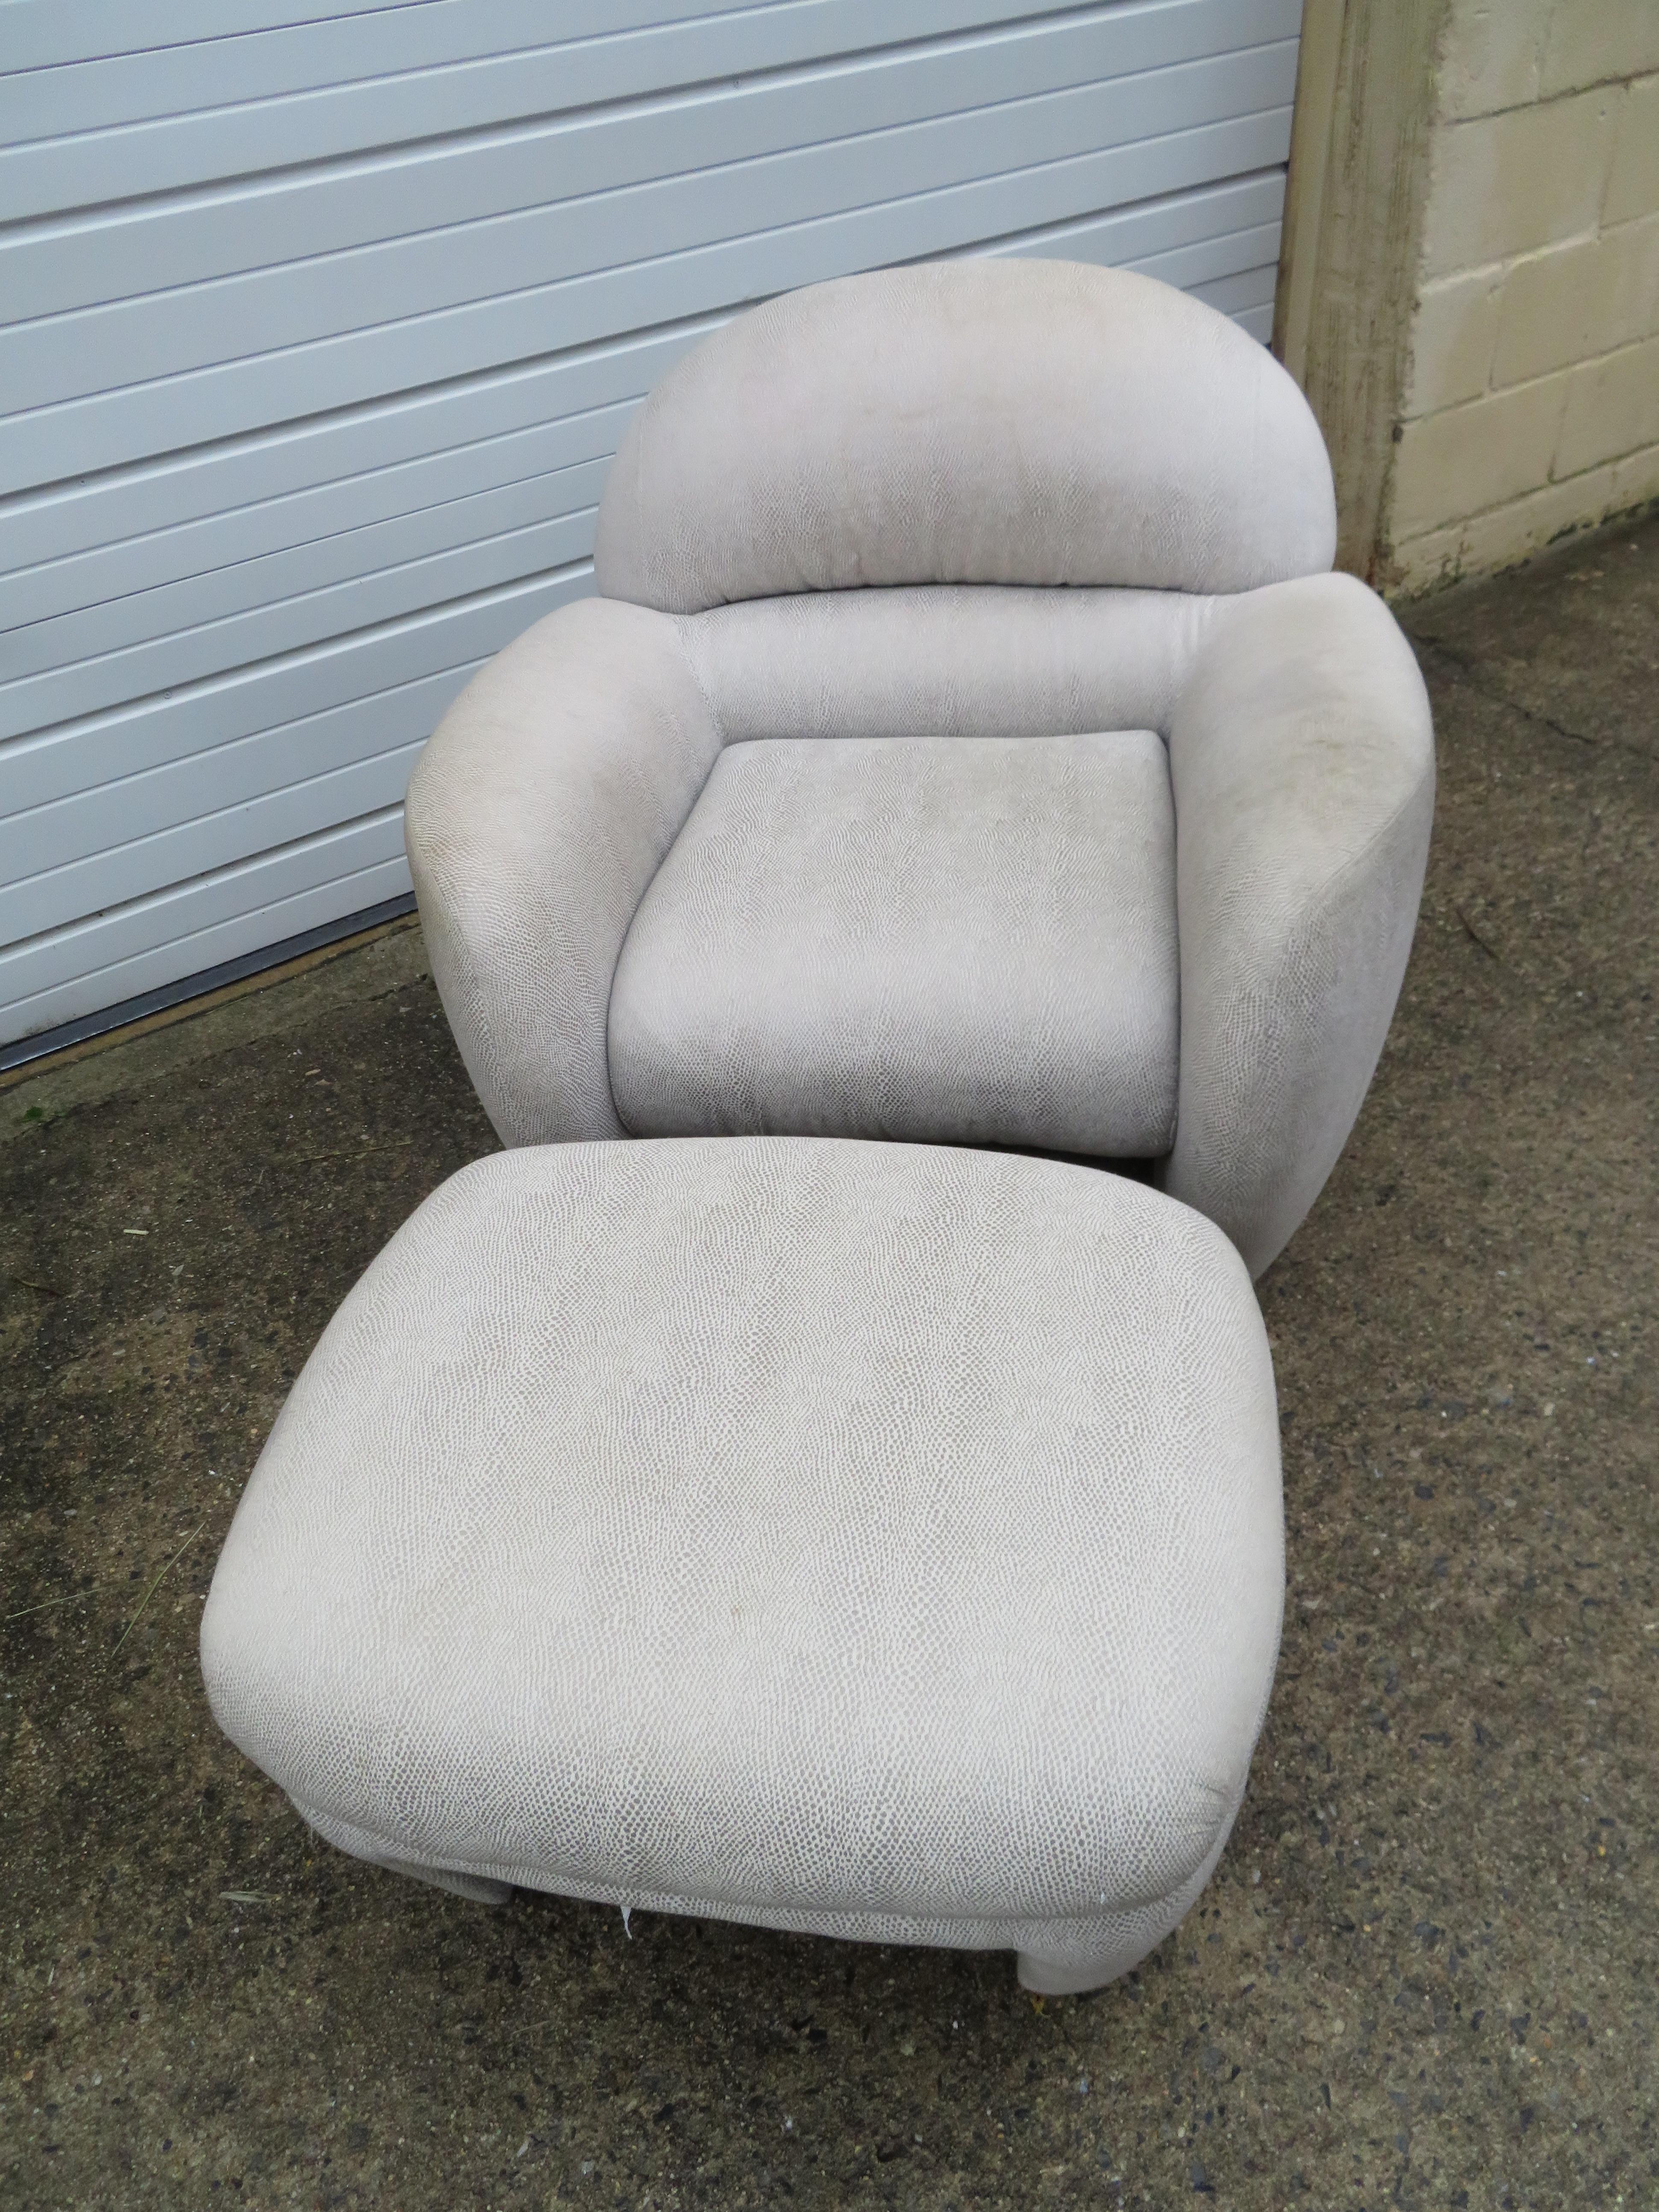 American Lovely Vladimir Kagan for Preview Lounge Chair Ottoman Mid-Century Modern